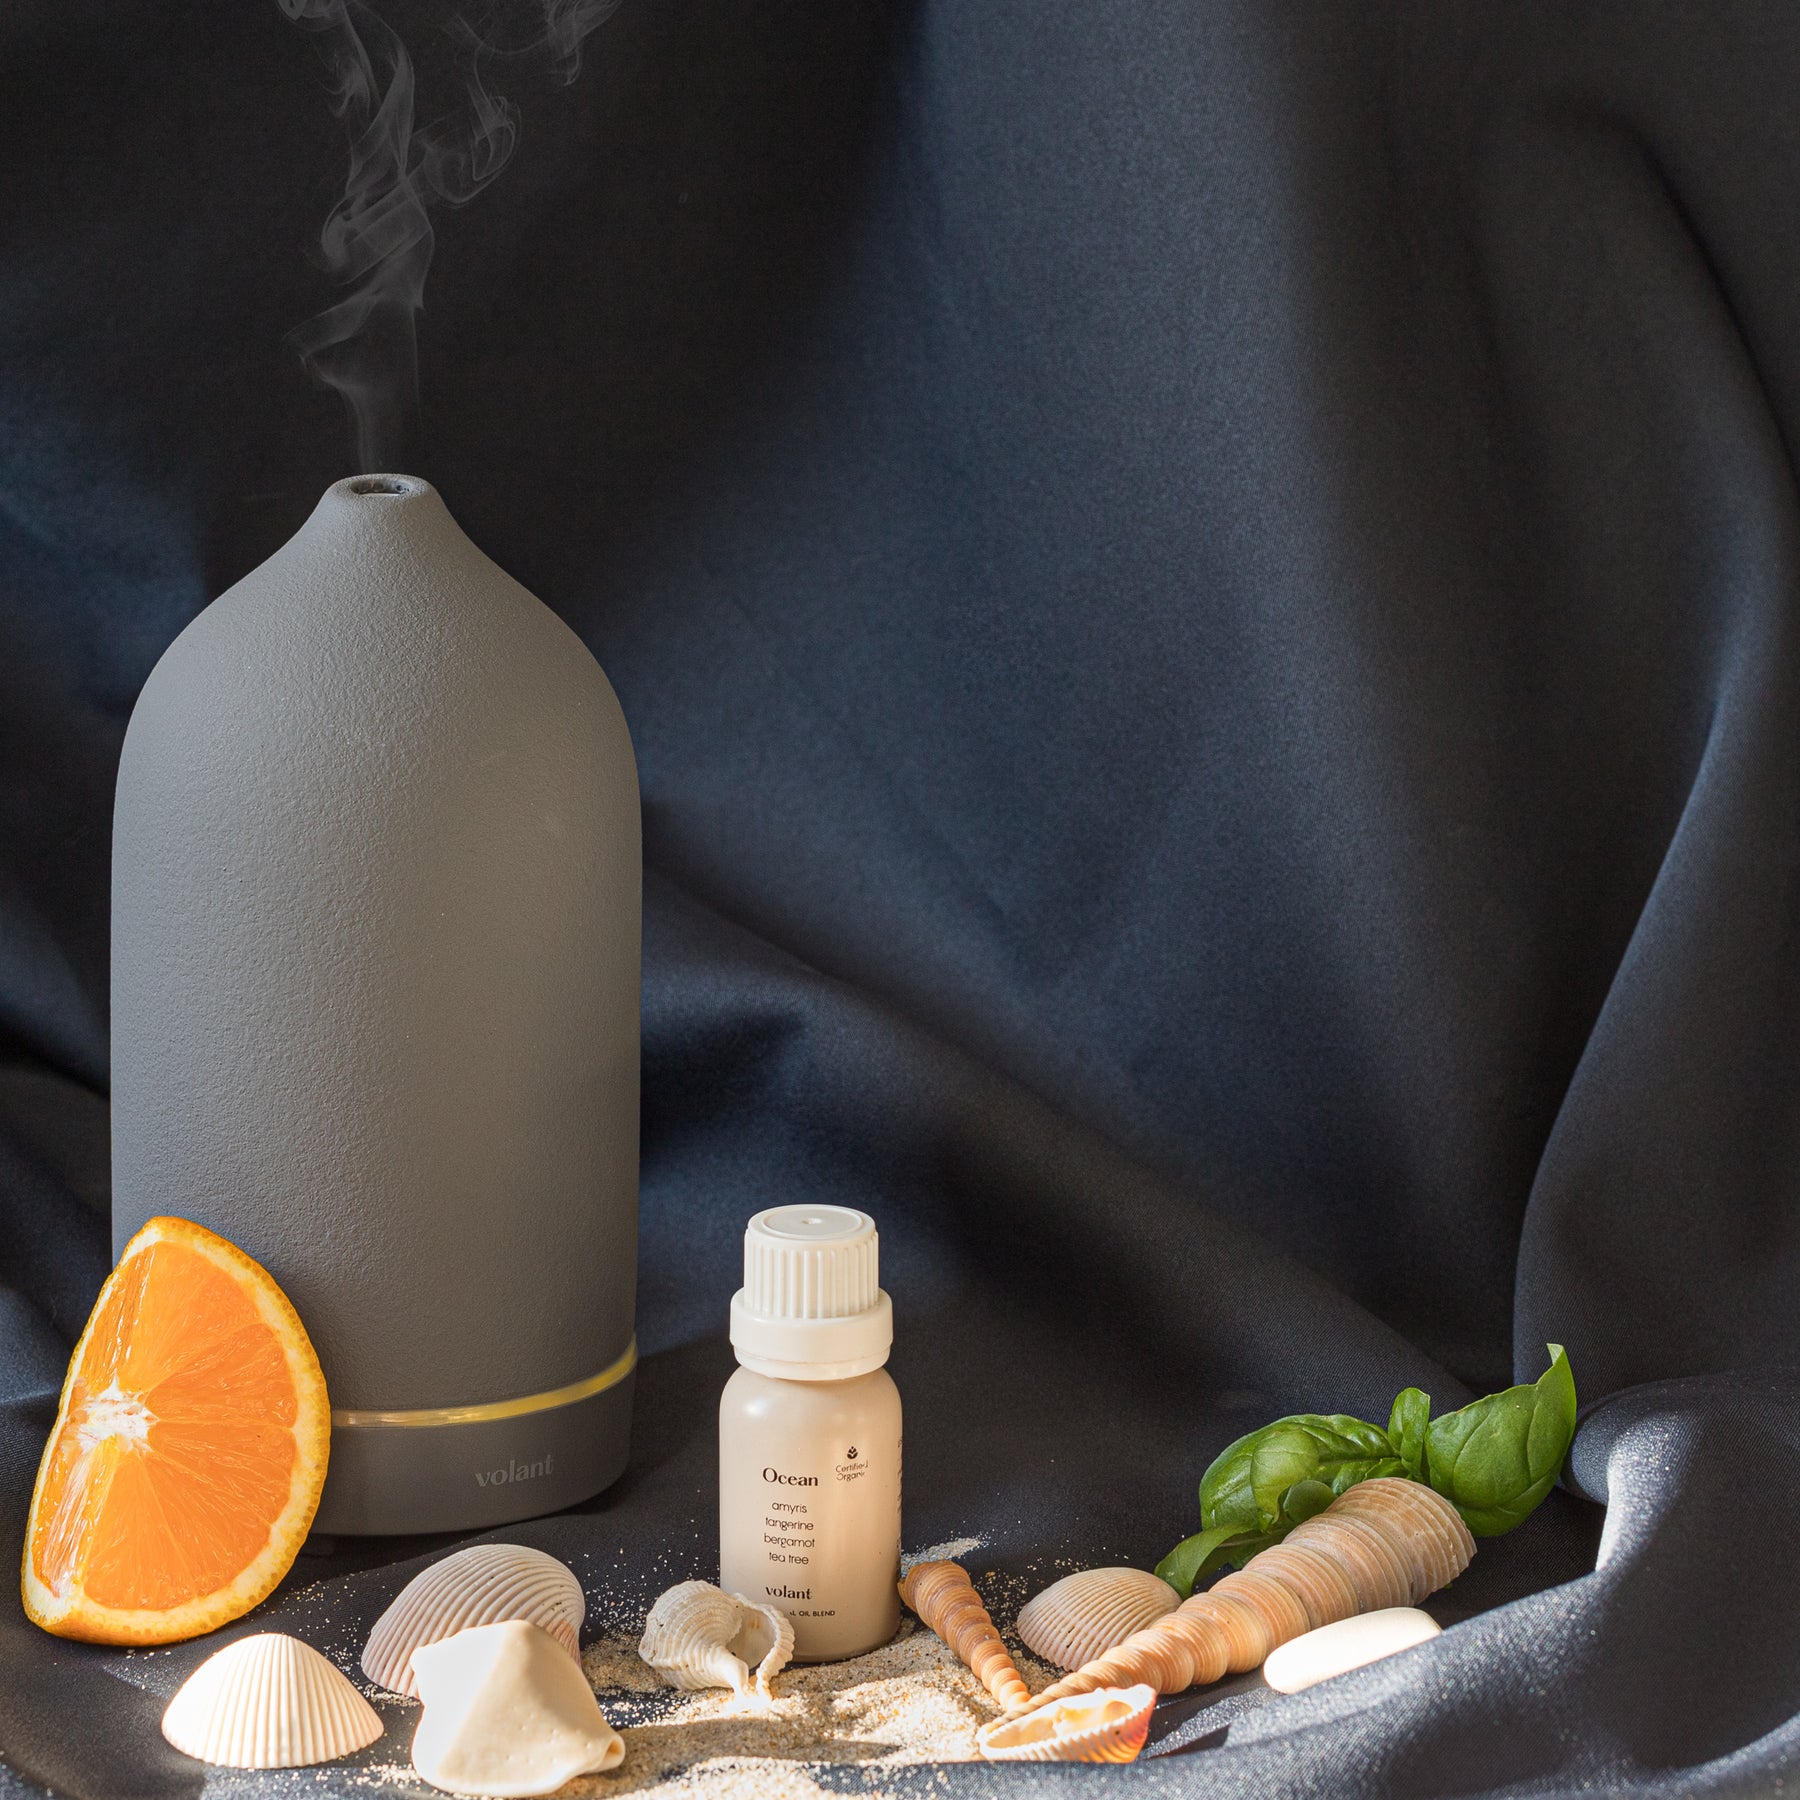 volant grey diffuser using ocean essential oil blend made with pure Amyris, Tangerine, Tea Tree, and Bergamot